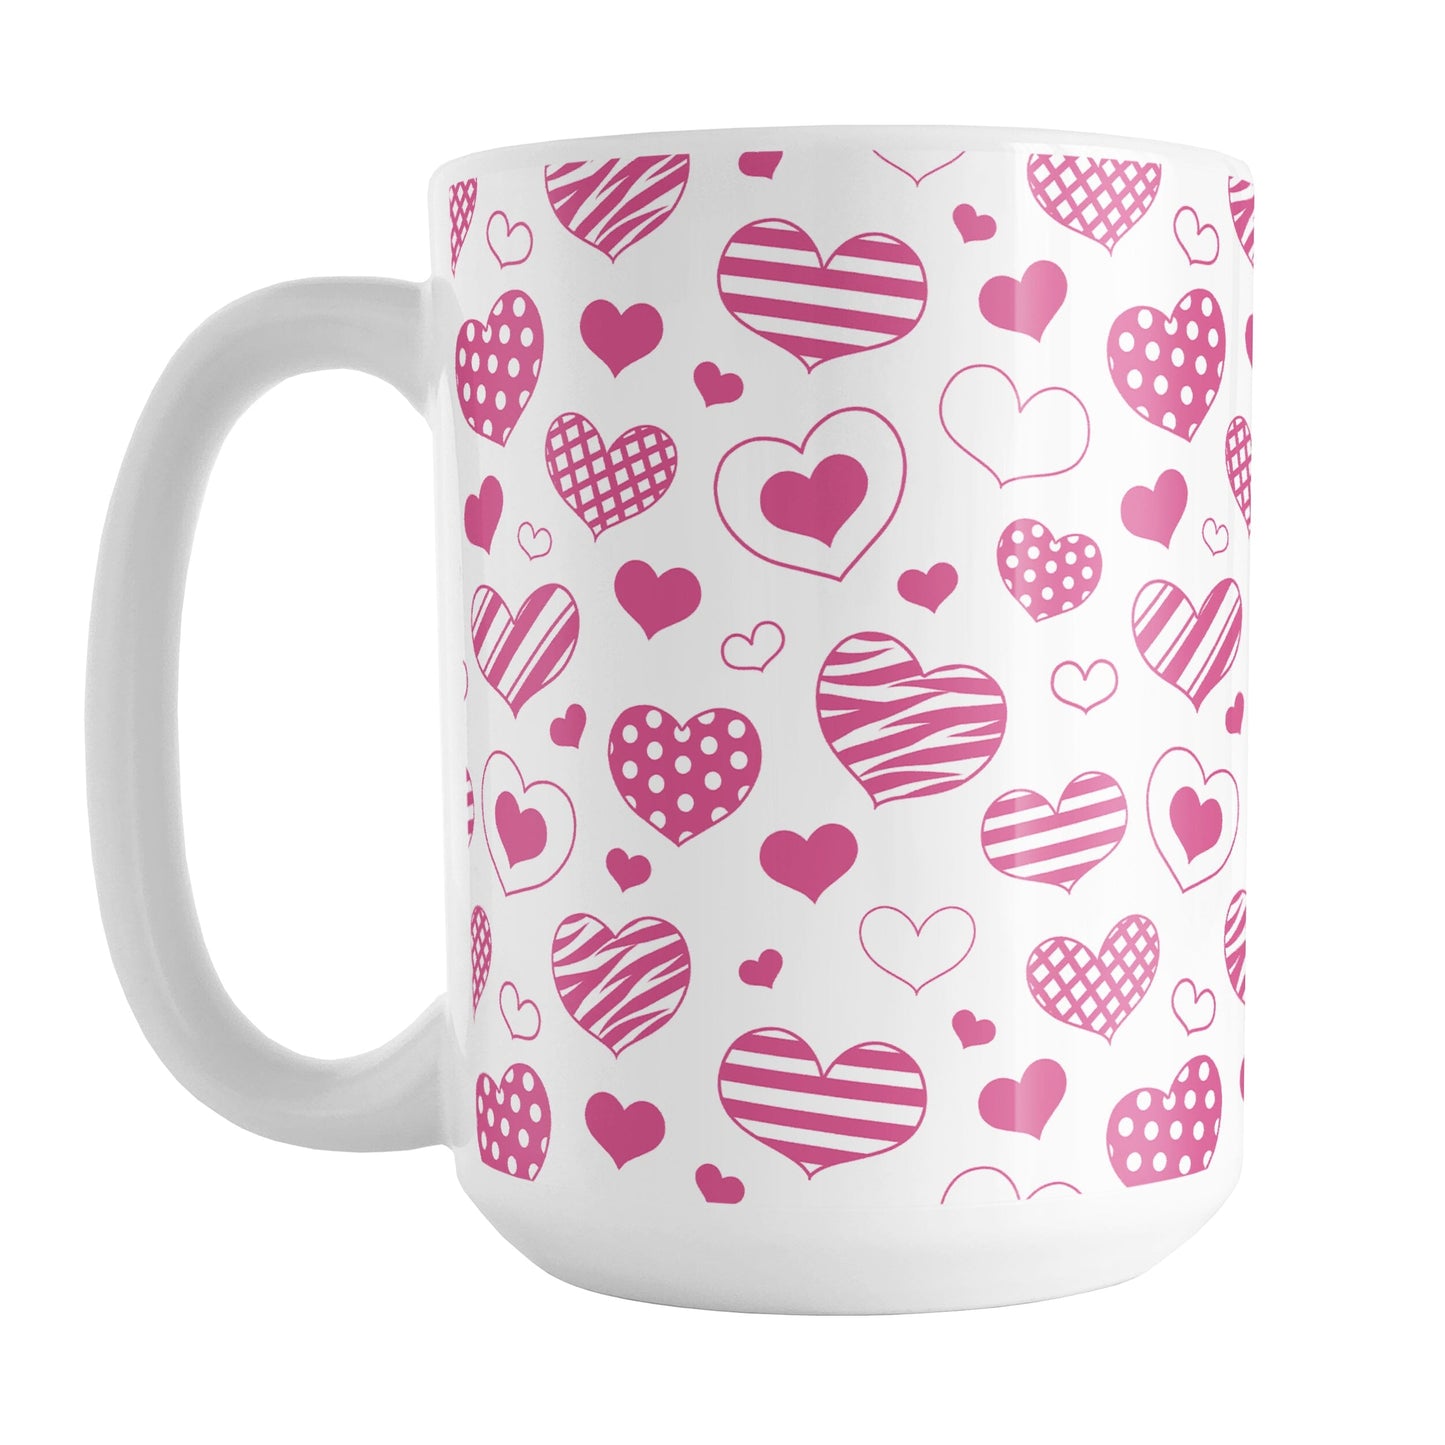 Pink Heart Doodles Mug (15oz) at Amy's Coffee Mugs. A ceramic coffee mug designed with hand-drawn pink heart doodles in a pattern that wraps around the cup. This cute heart pattern is perfect for Valentine's Day or for anyone who loves hearts and young-at-heart drawings. 